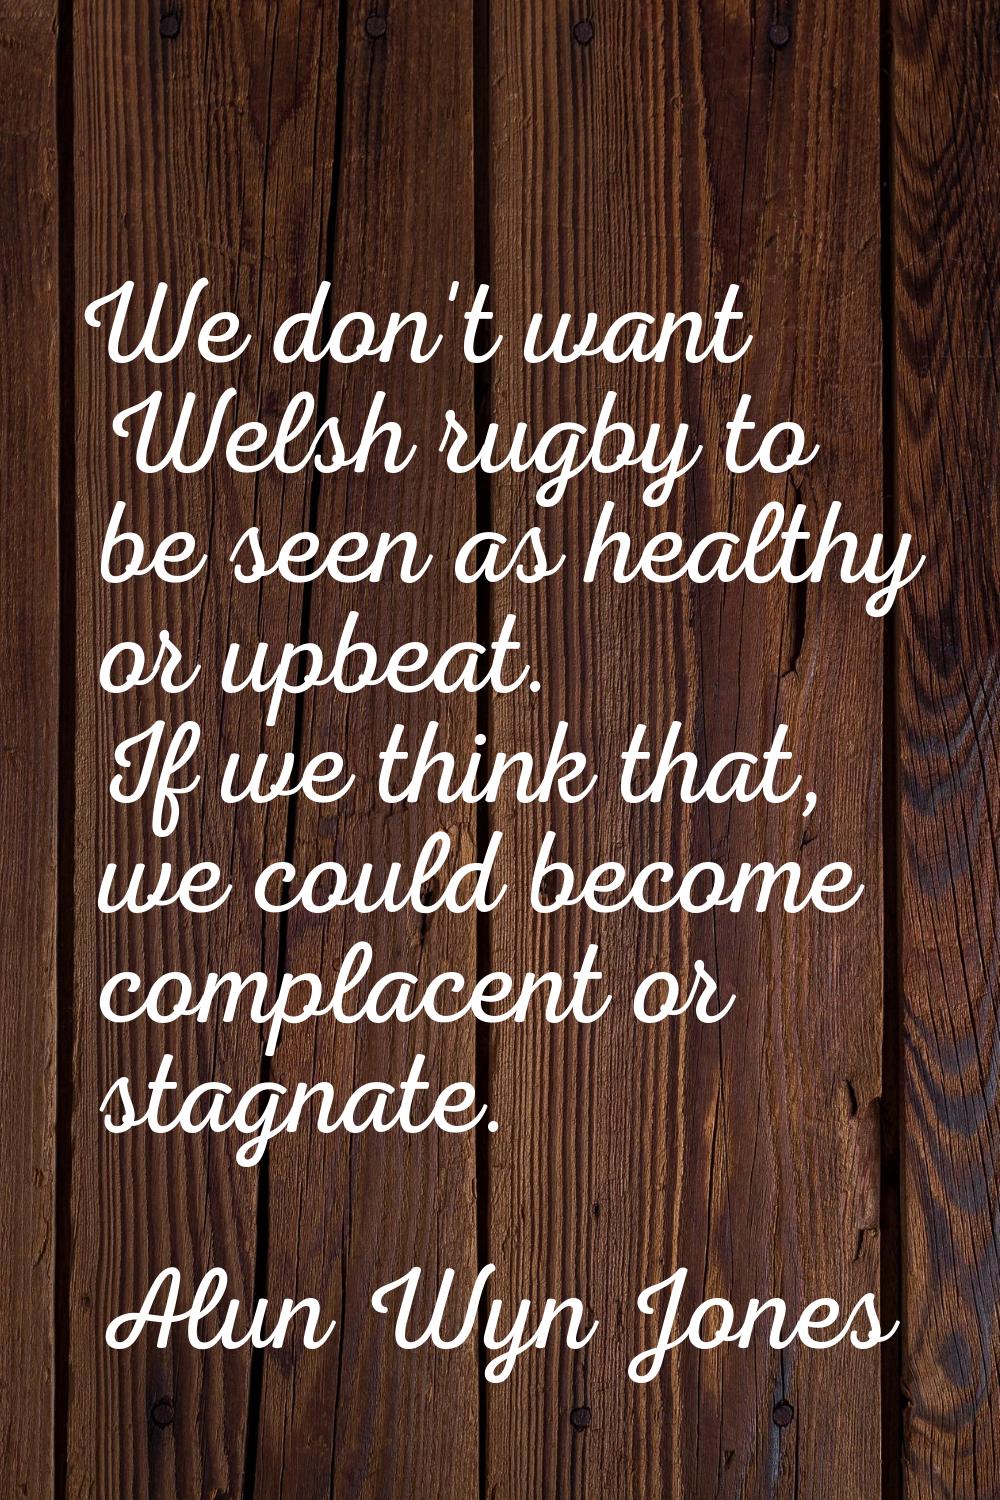 We don't want Welsh rugby to be seen as healthy or upbeat. If we think that, we could become compla